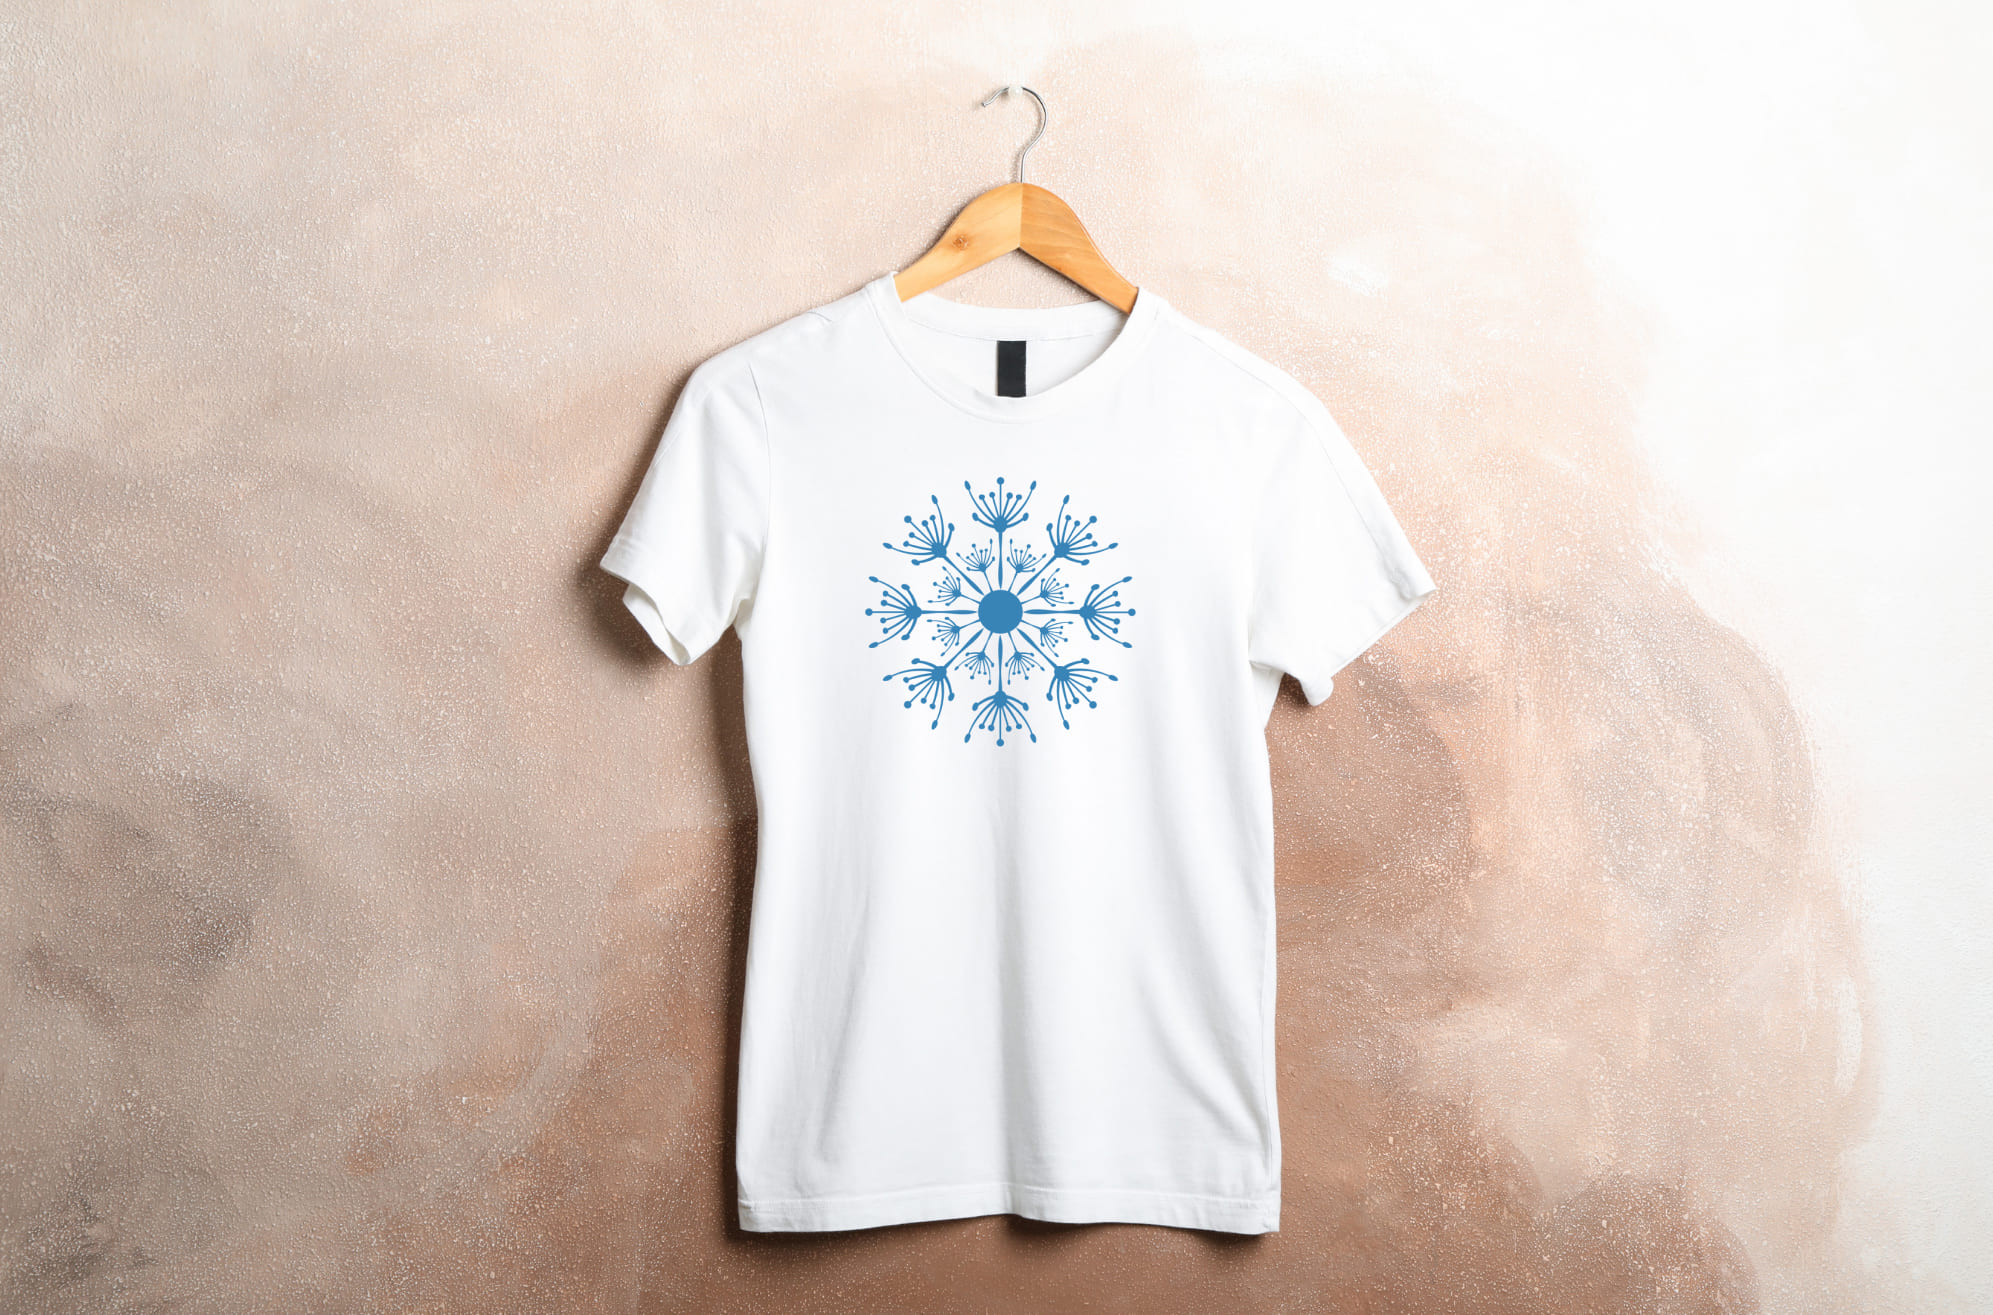 T-shirt image with colorful dandelion print in blue.